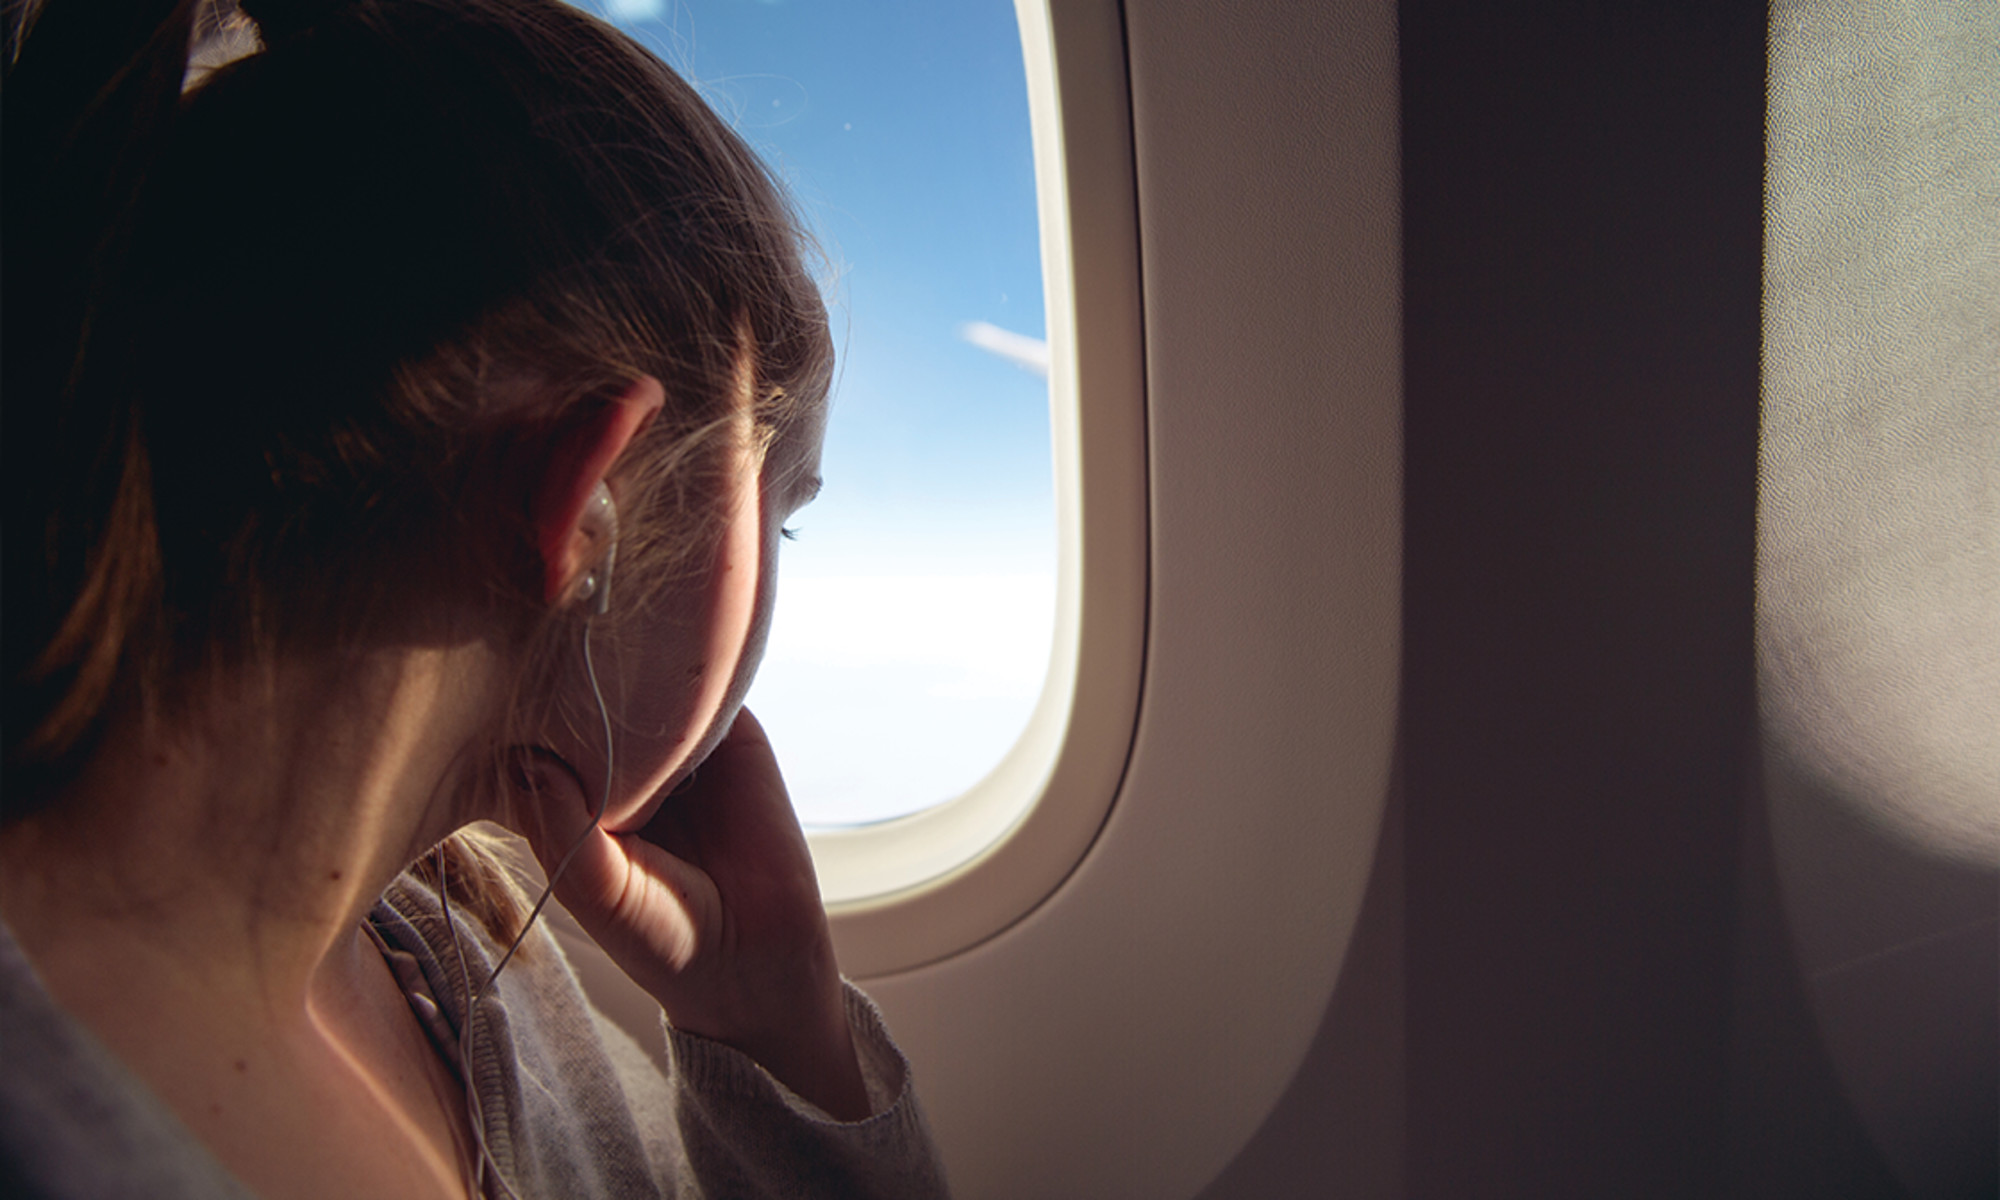 A Stanford MD’s Self-Hypnosis Exercise For Anxious Fliers